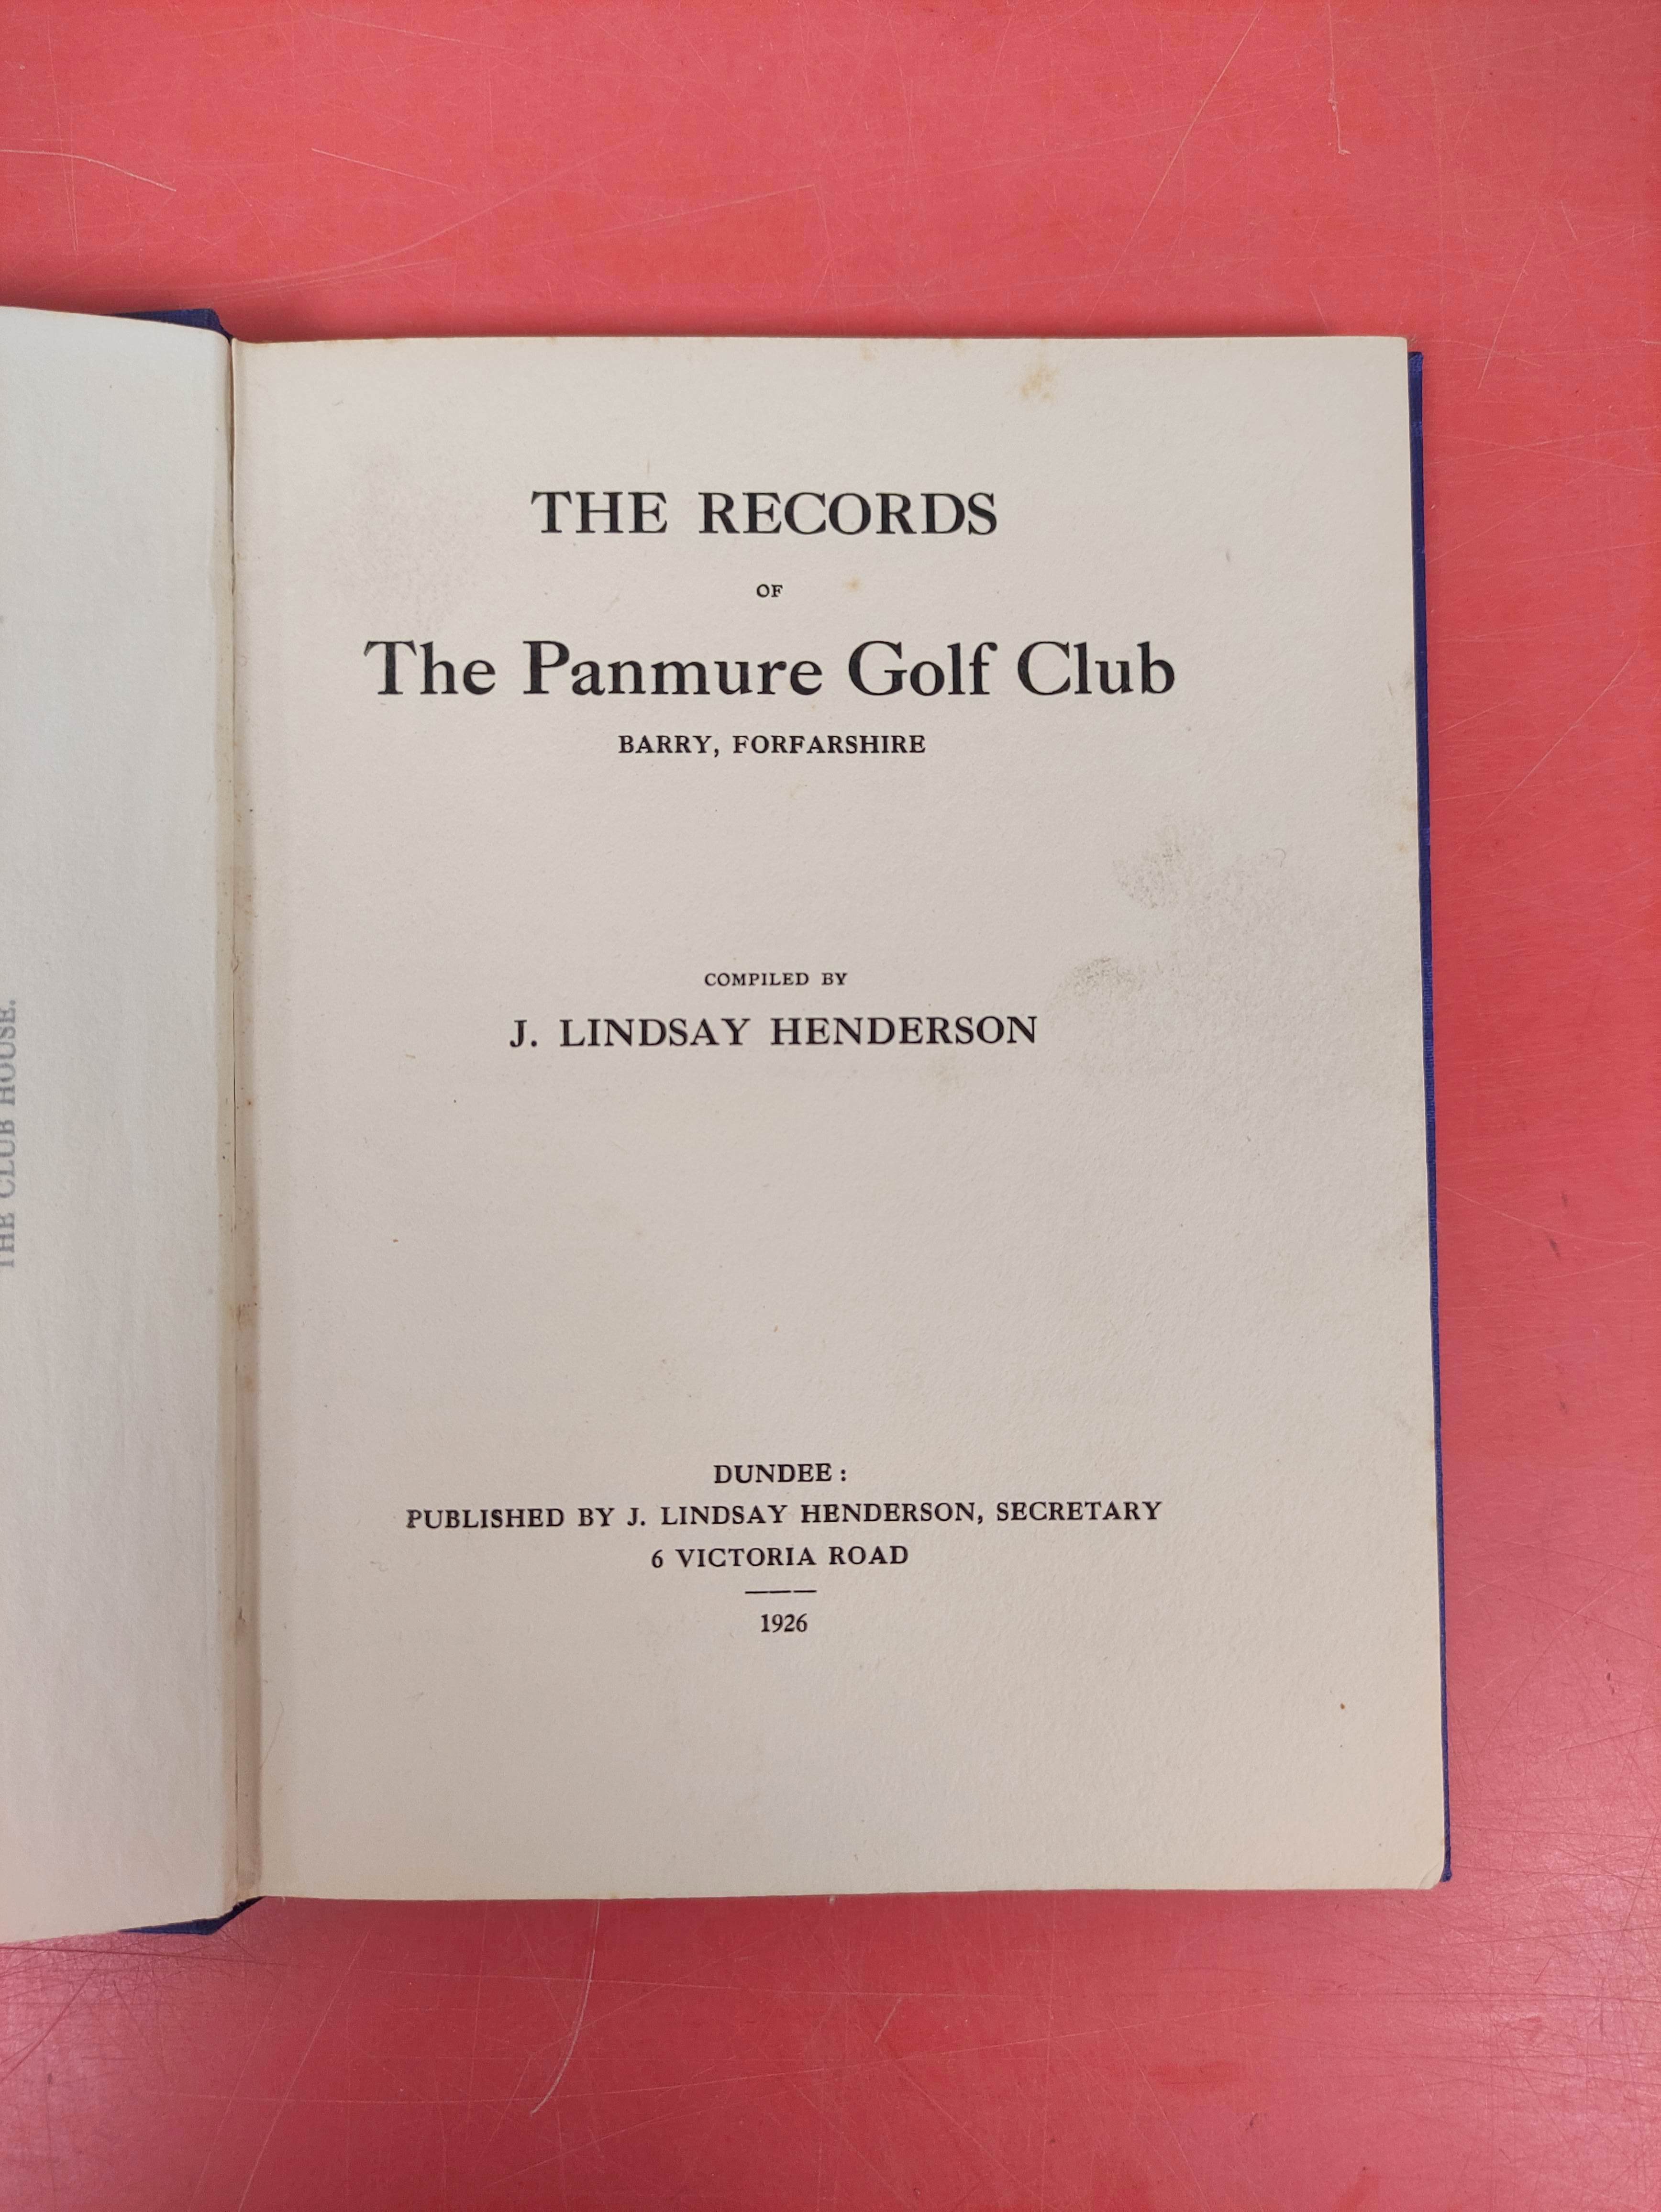 HENDERSON J. LINDSAY.  The Records of the Panmure Golf Club, Barry, Forfarshire. Photograph frontis. - Image 2 of 8